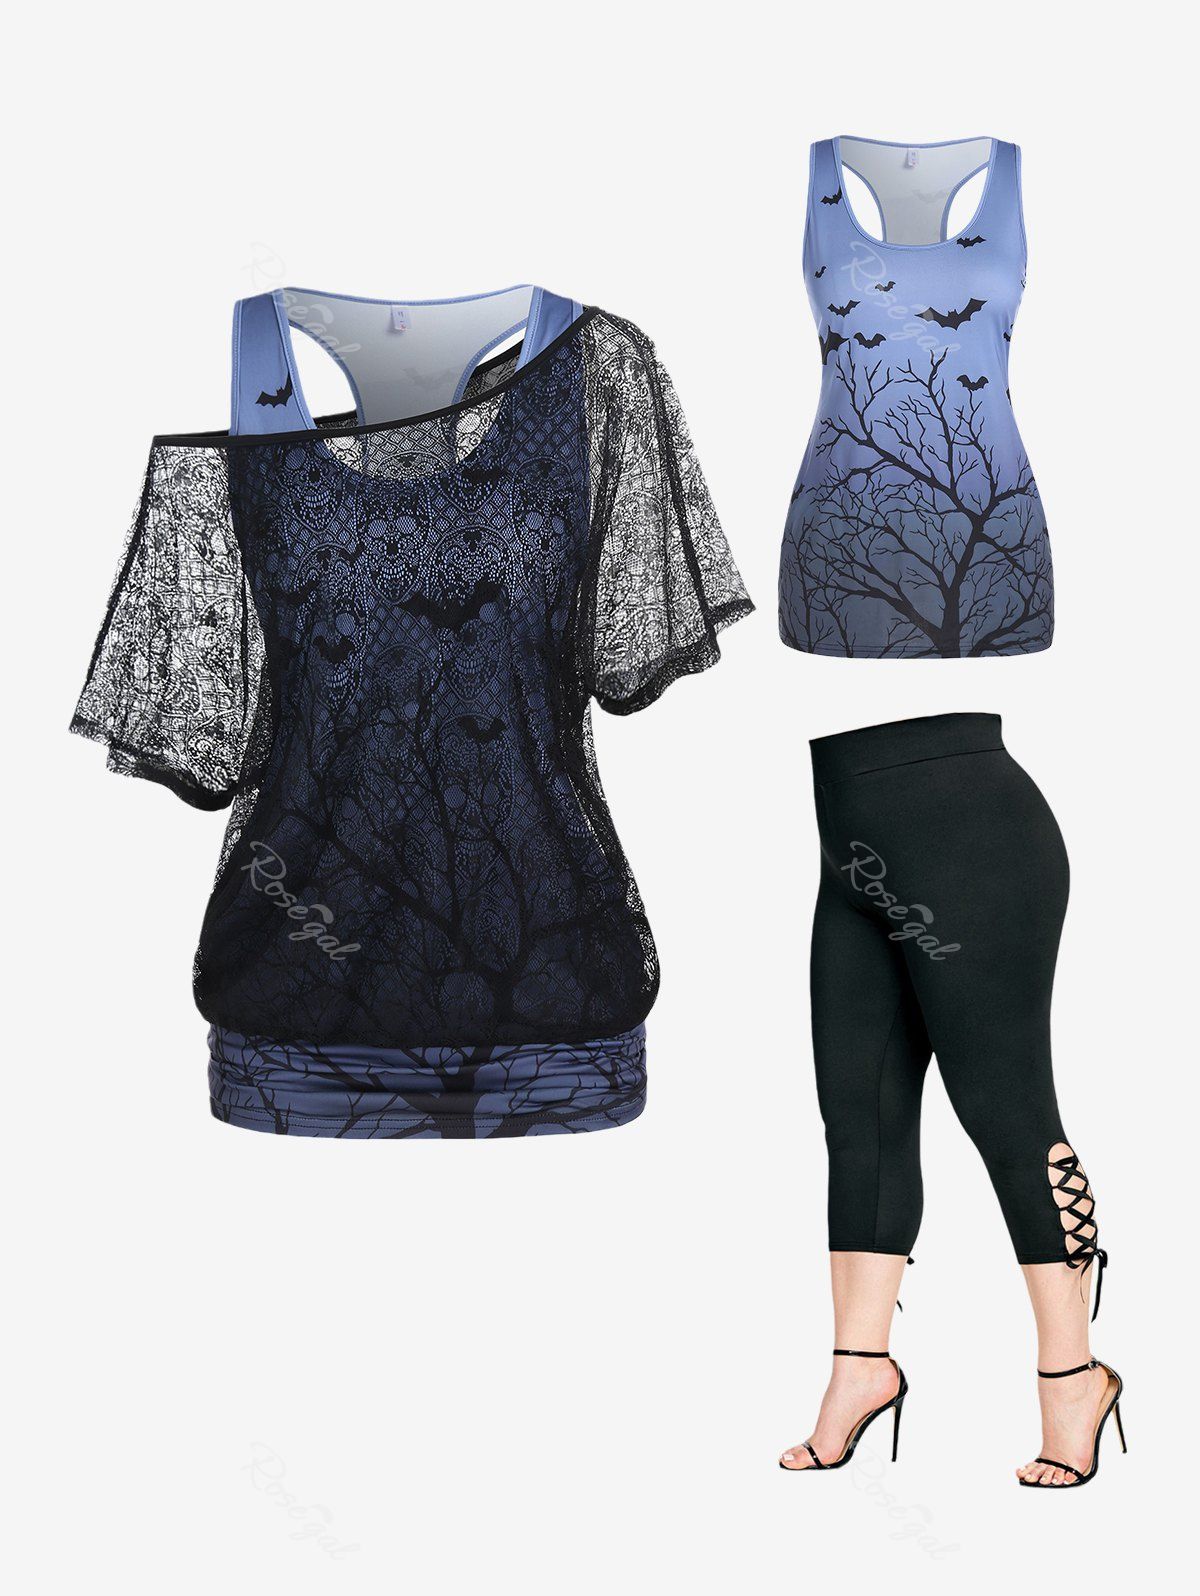 Shop Gothic Skew Neck Skull Lace Tee and Tank Top Set and Capri Leggings Plus Size Summer Outfit  